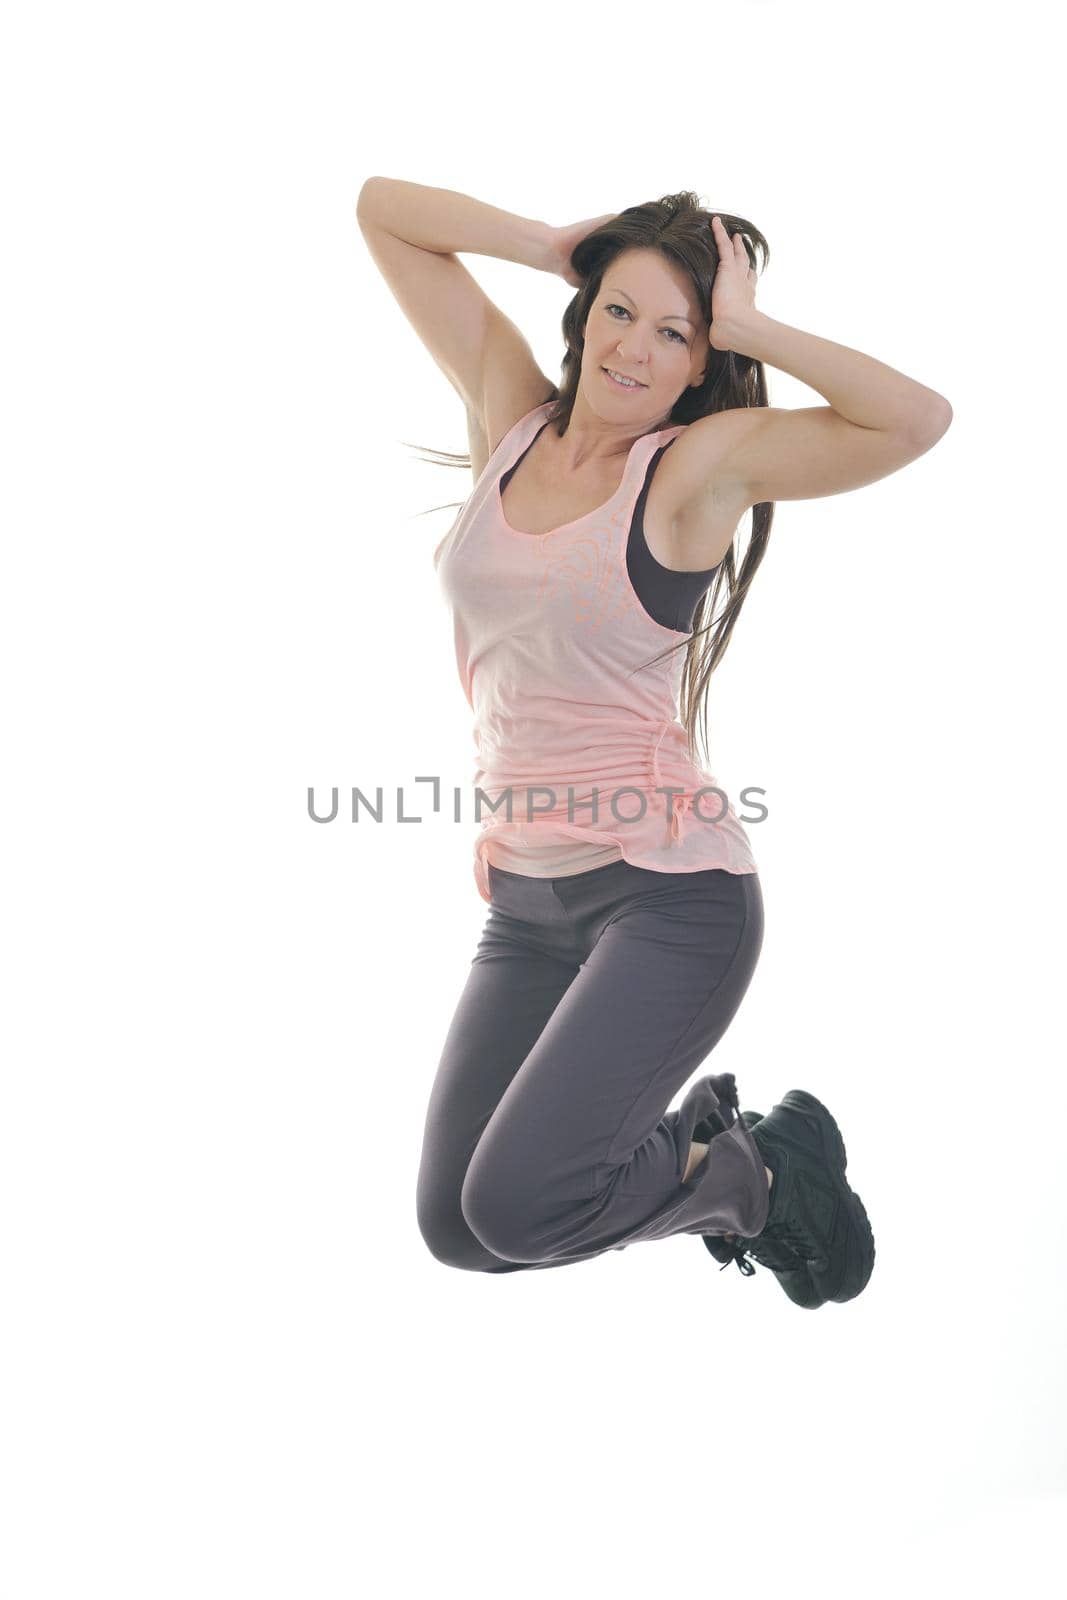 young healthy woman exercise fitness isolated on white